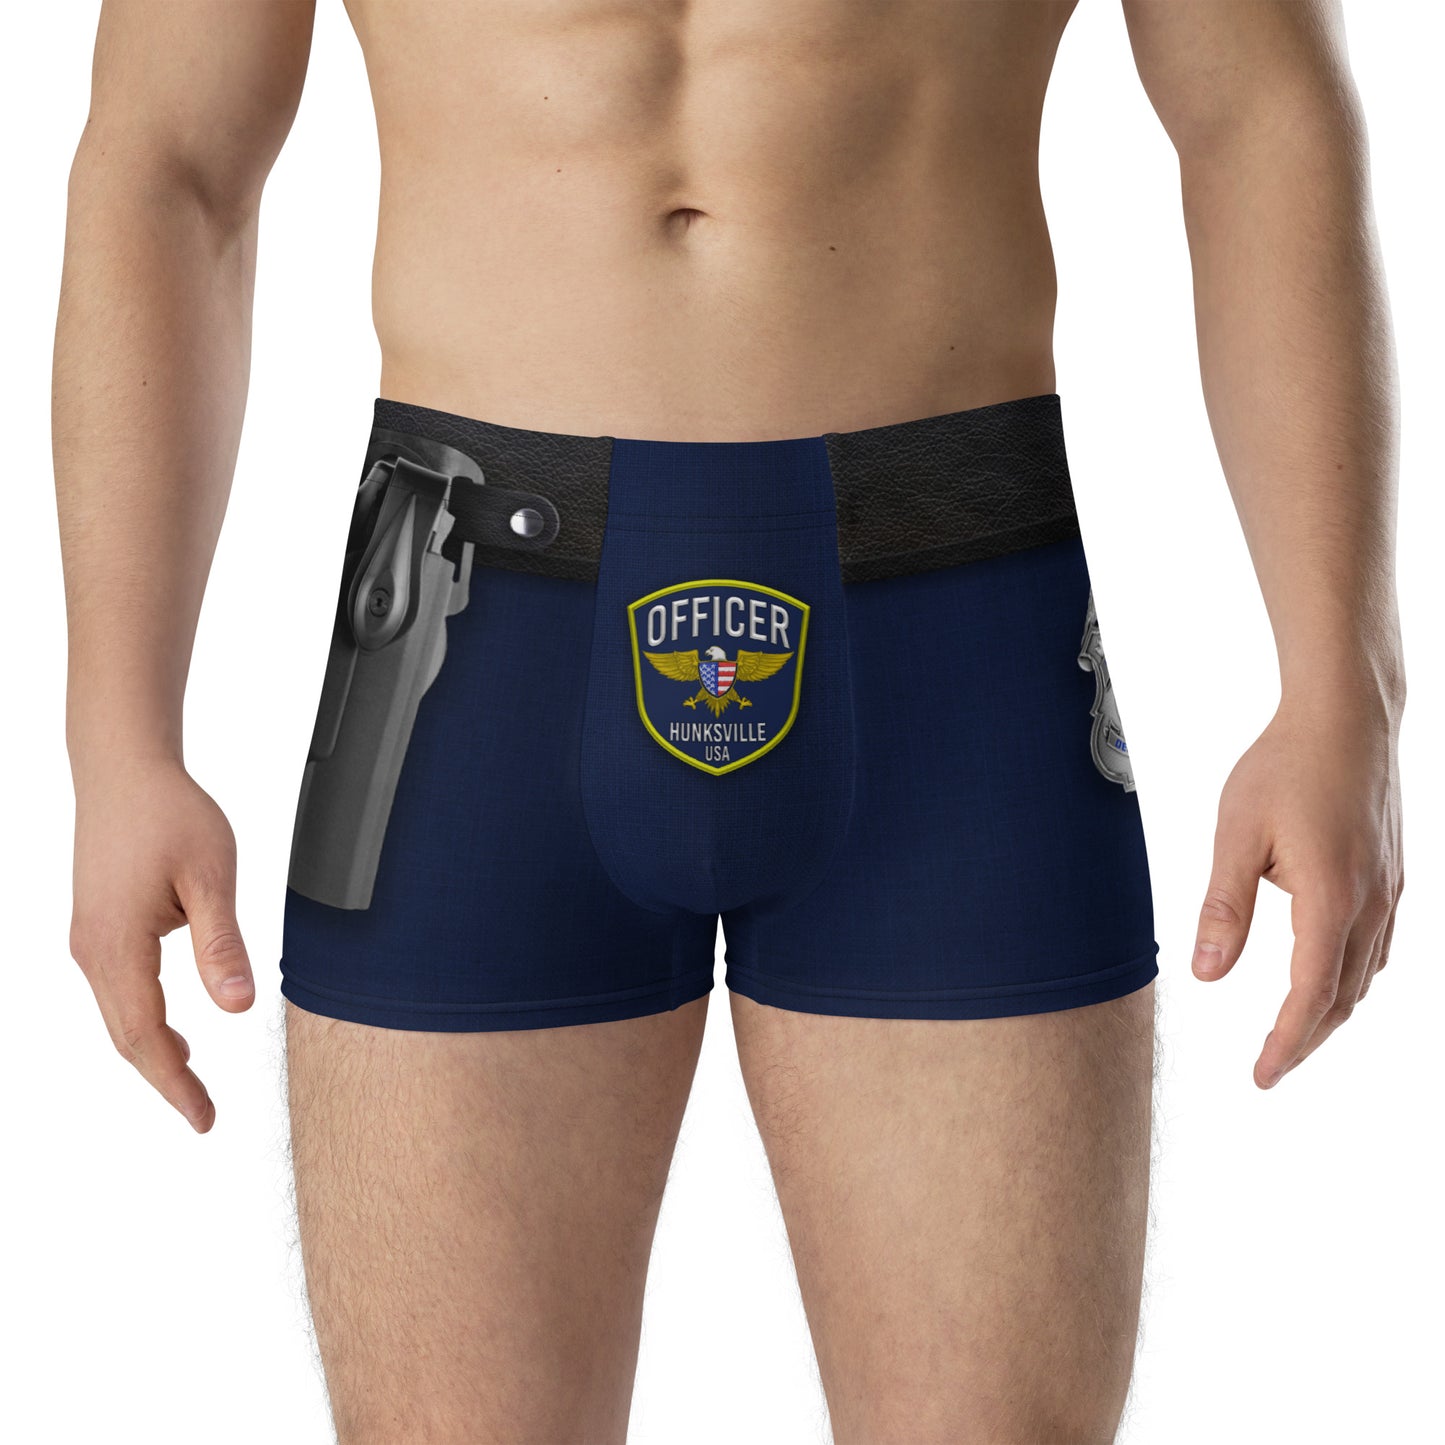 Pajamgeries Boxer Briefs - Officer Hotstuff